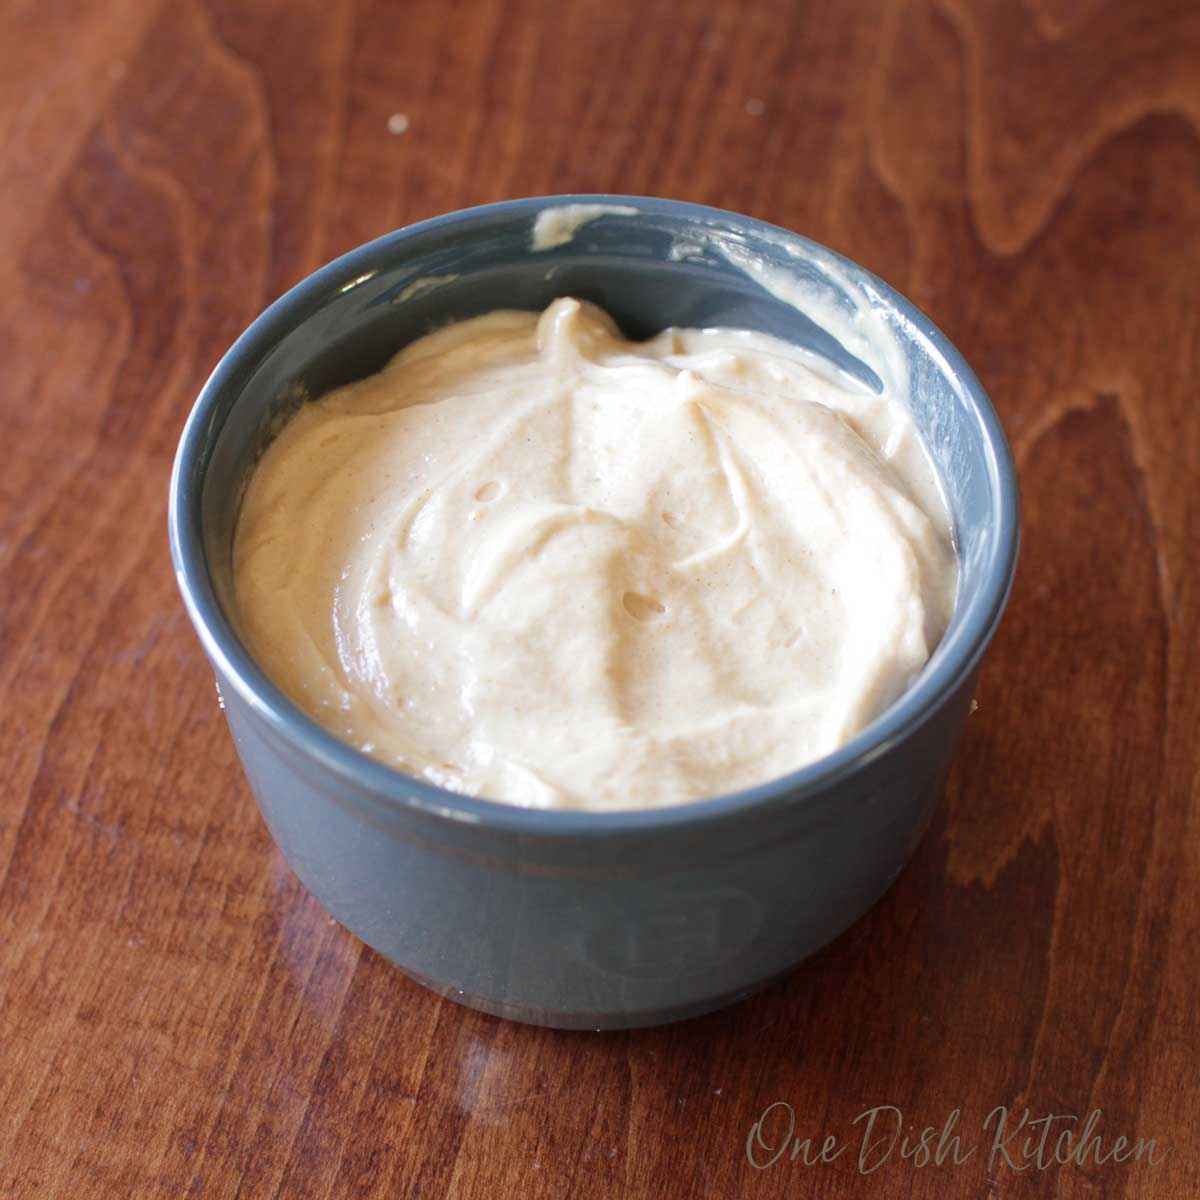 Peanut butter mixed with whipped cream in a blue ramekin on a wooden table.